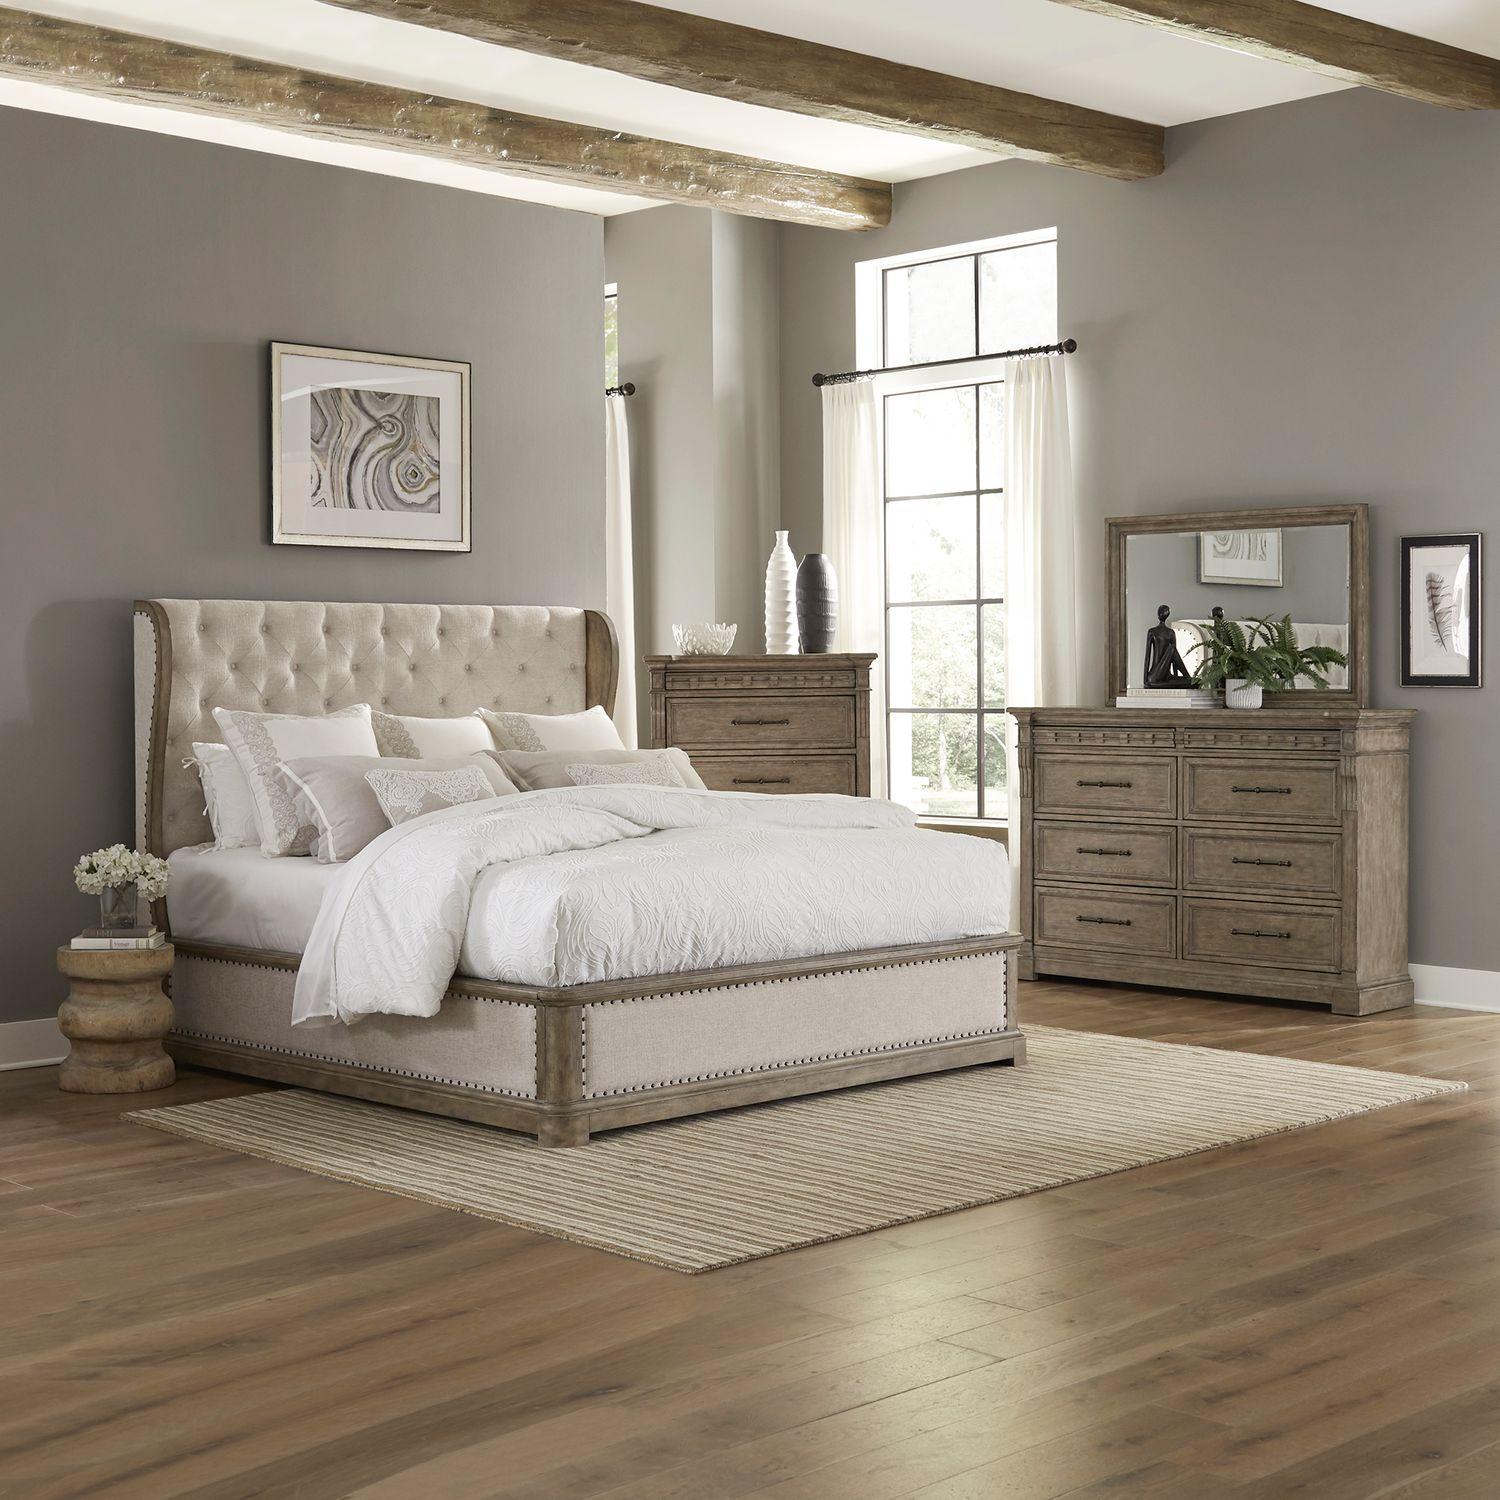 Transitional Platform Bedroom Set Town & Country (711-BR) 711-BR-QSHDMC in Taupe Linen